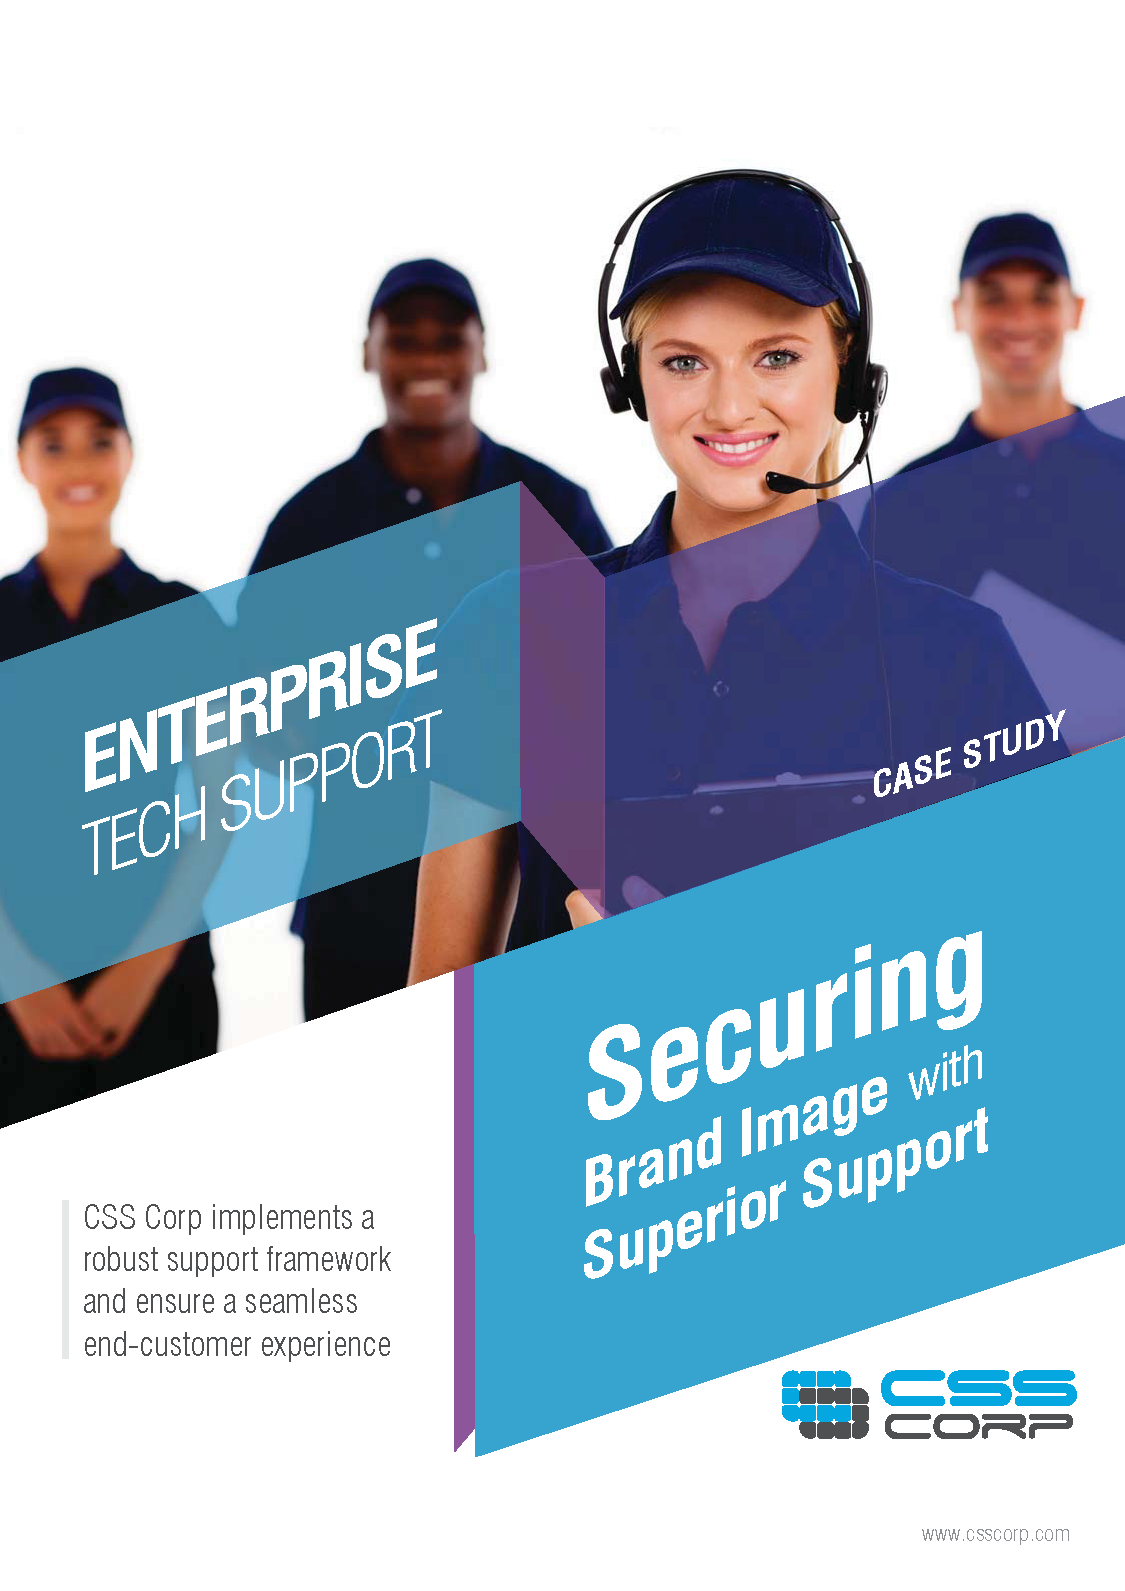 Securing Brand Image With Superior Support